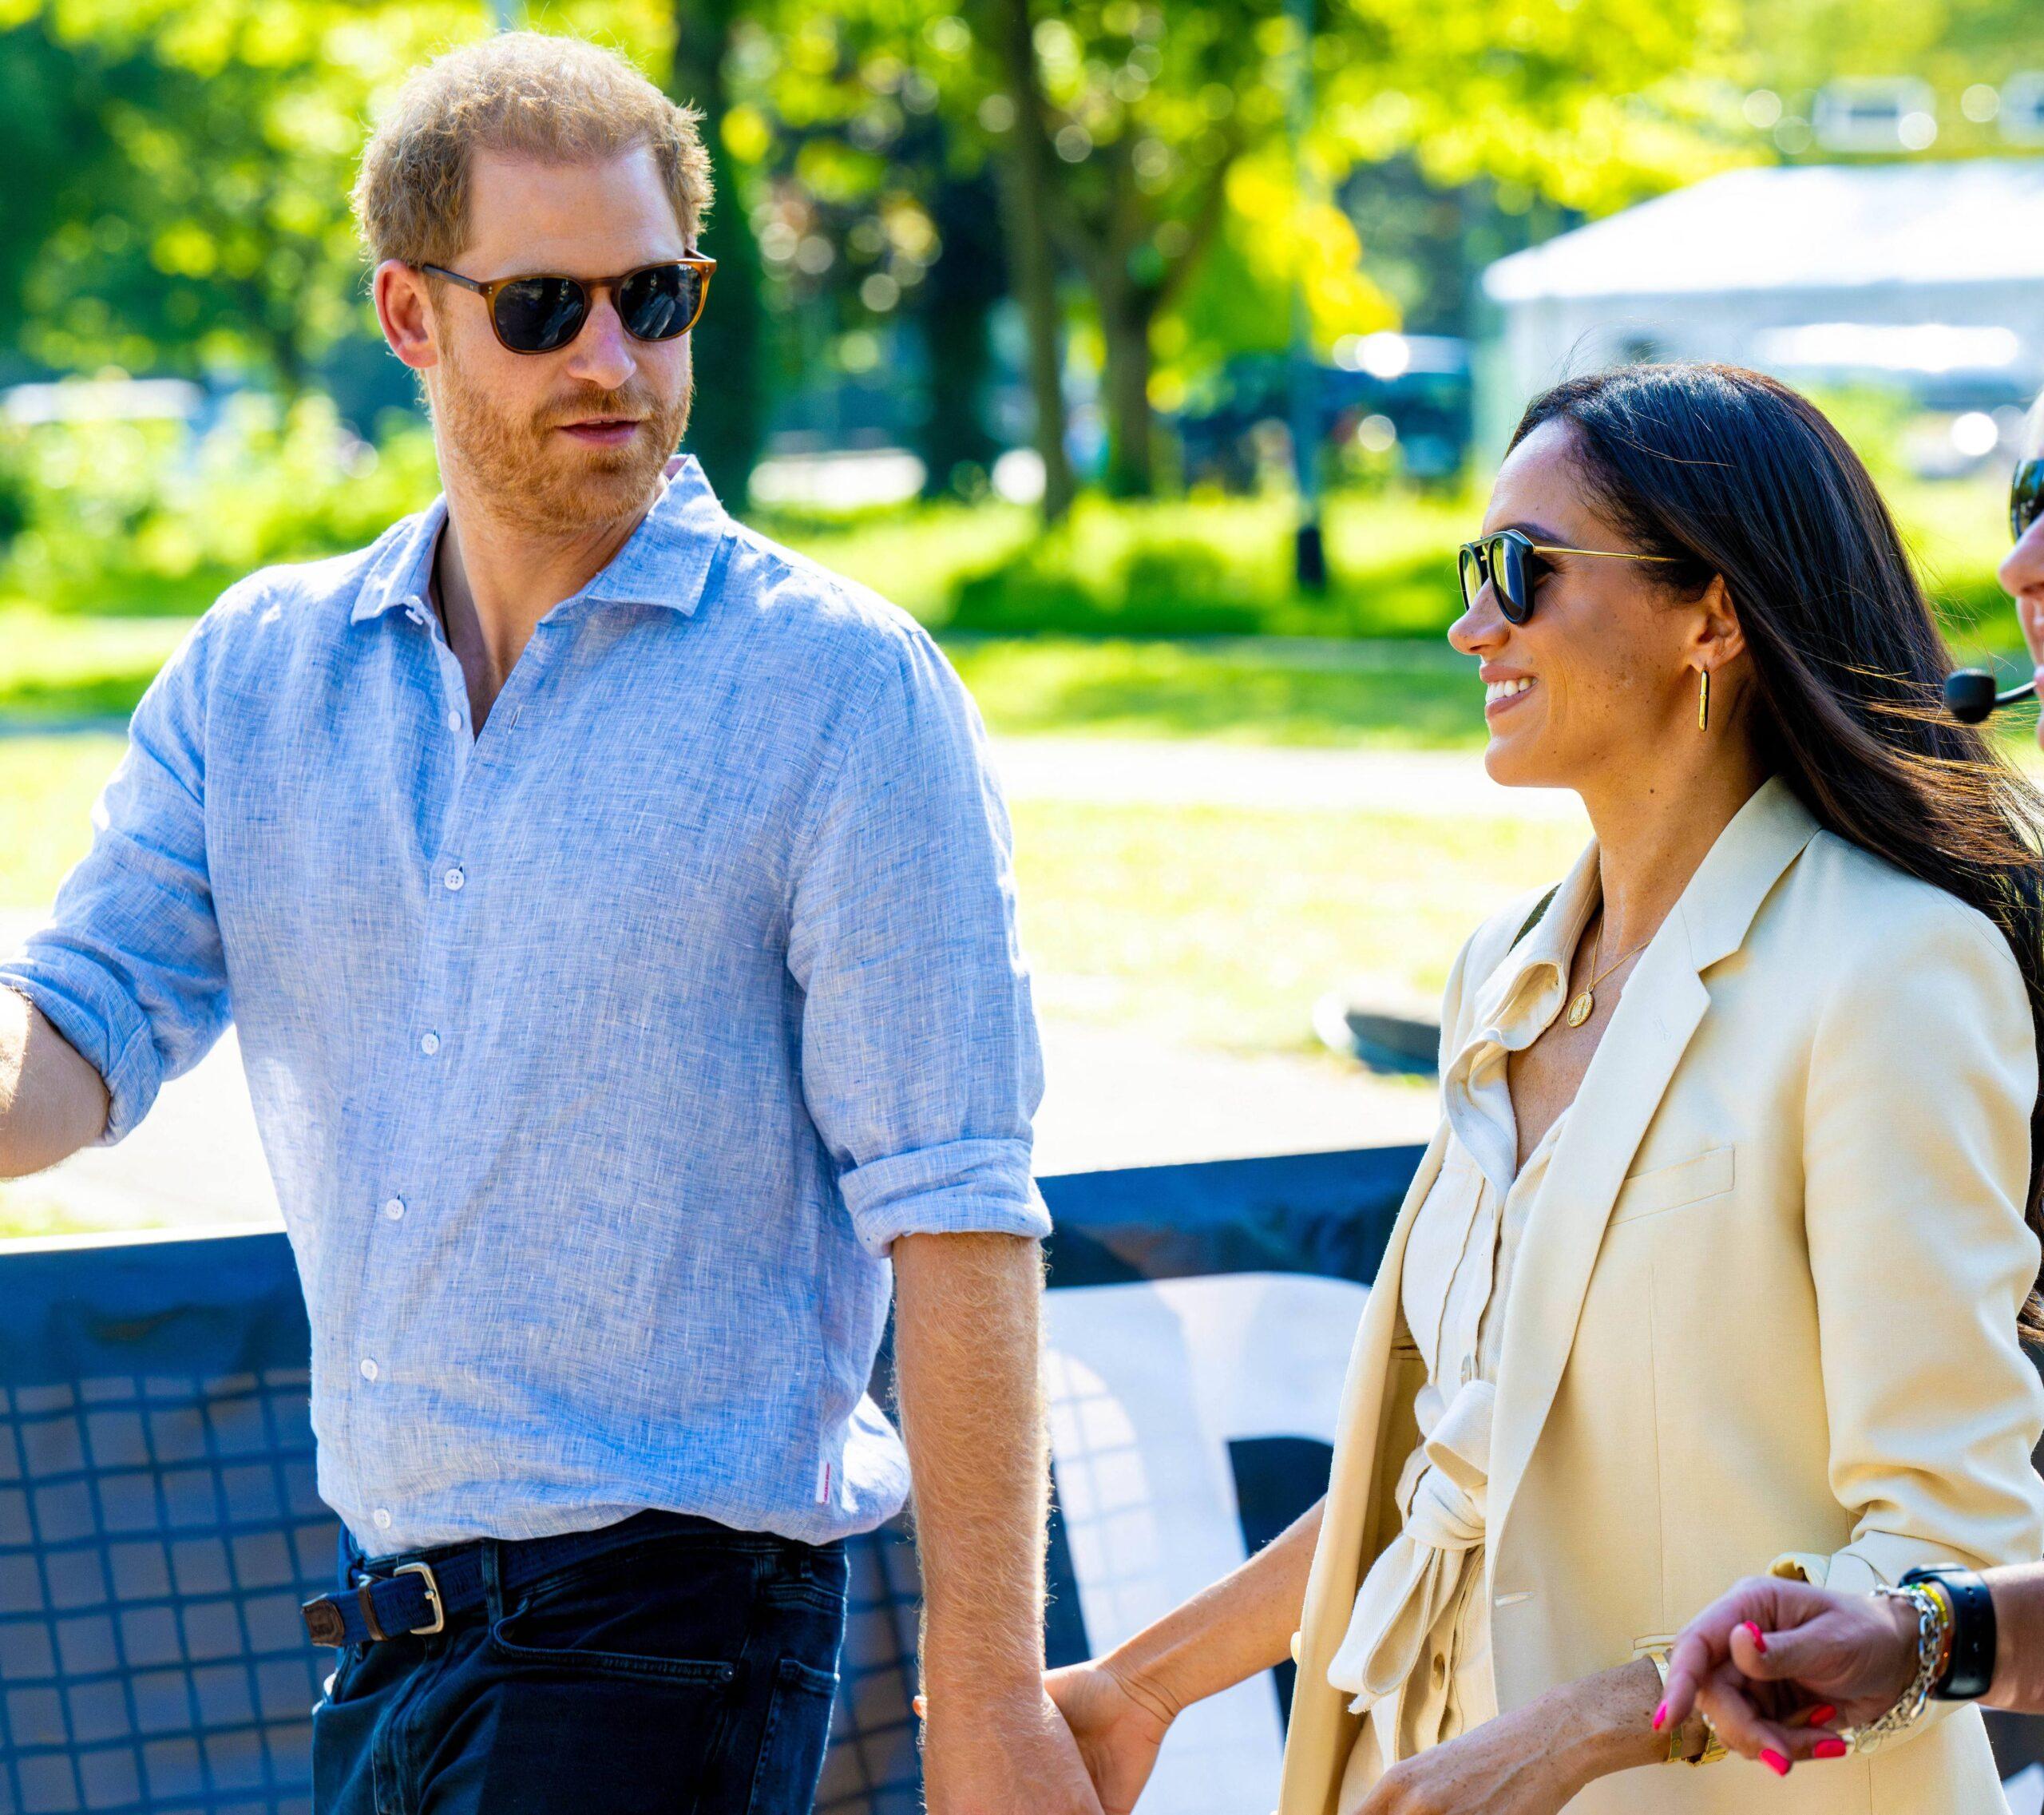 Meghan Markle is a sight to behold in a white dress for polo event with Prince Harry